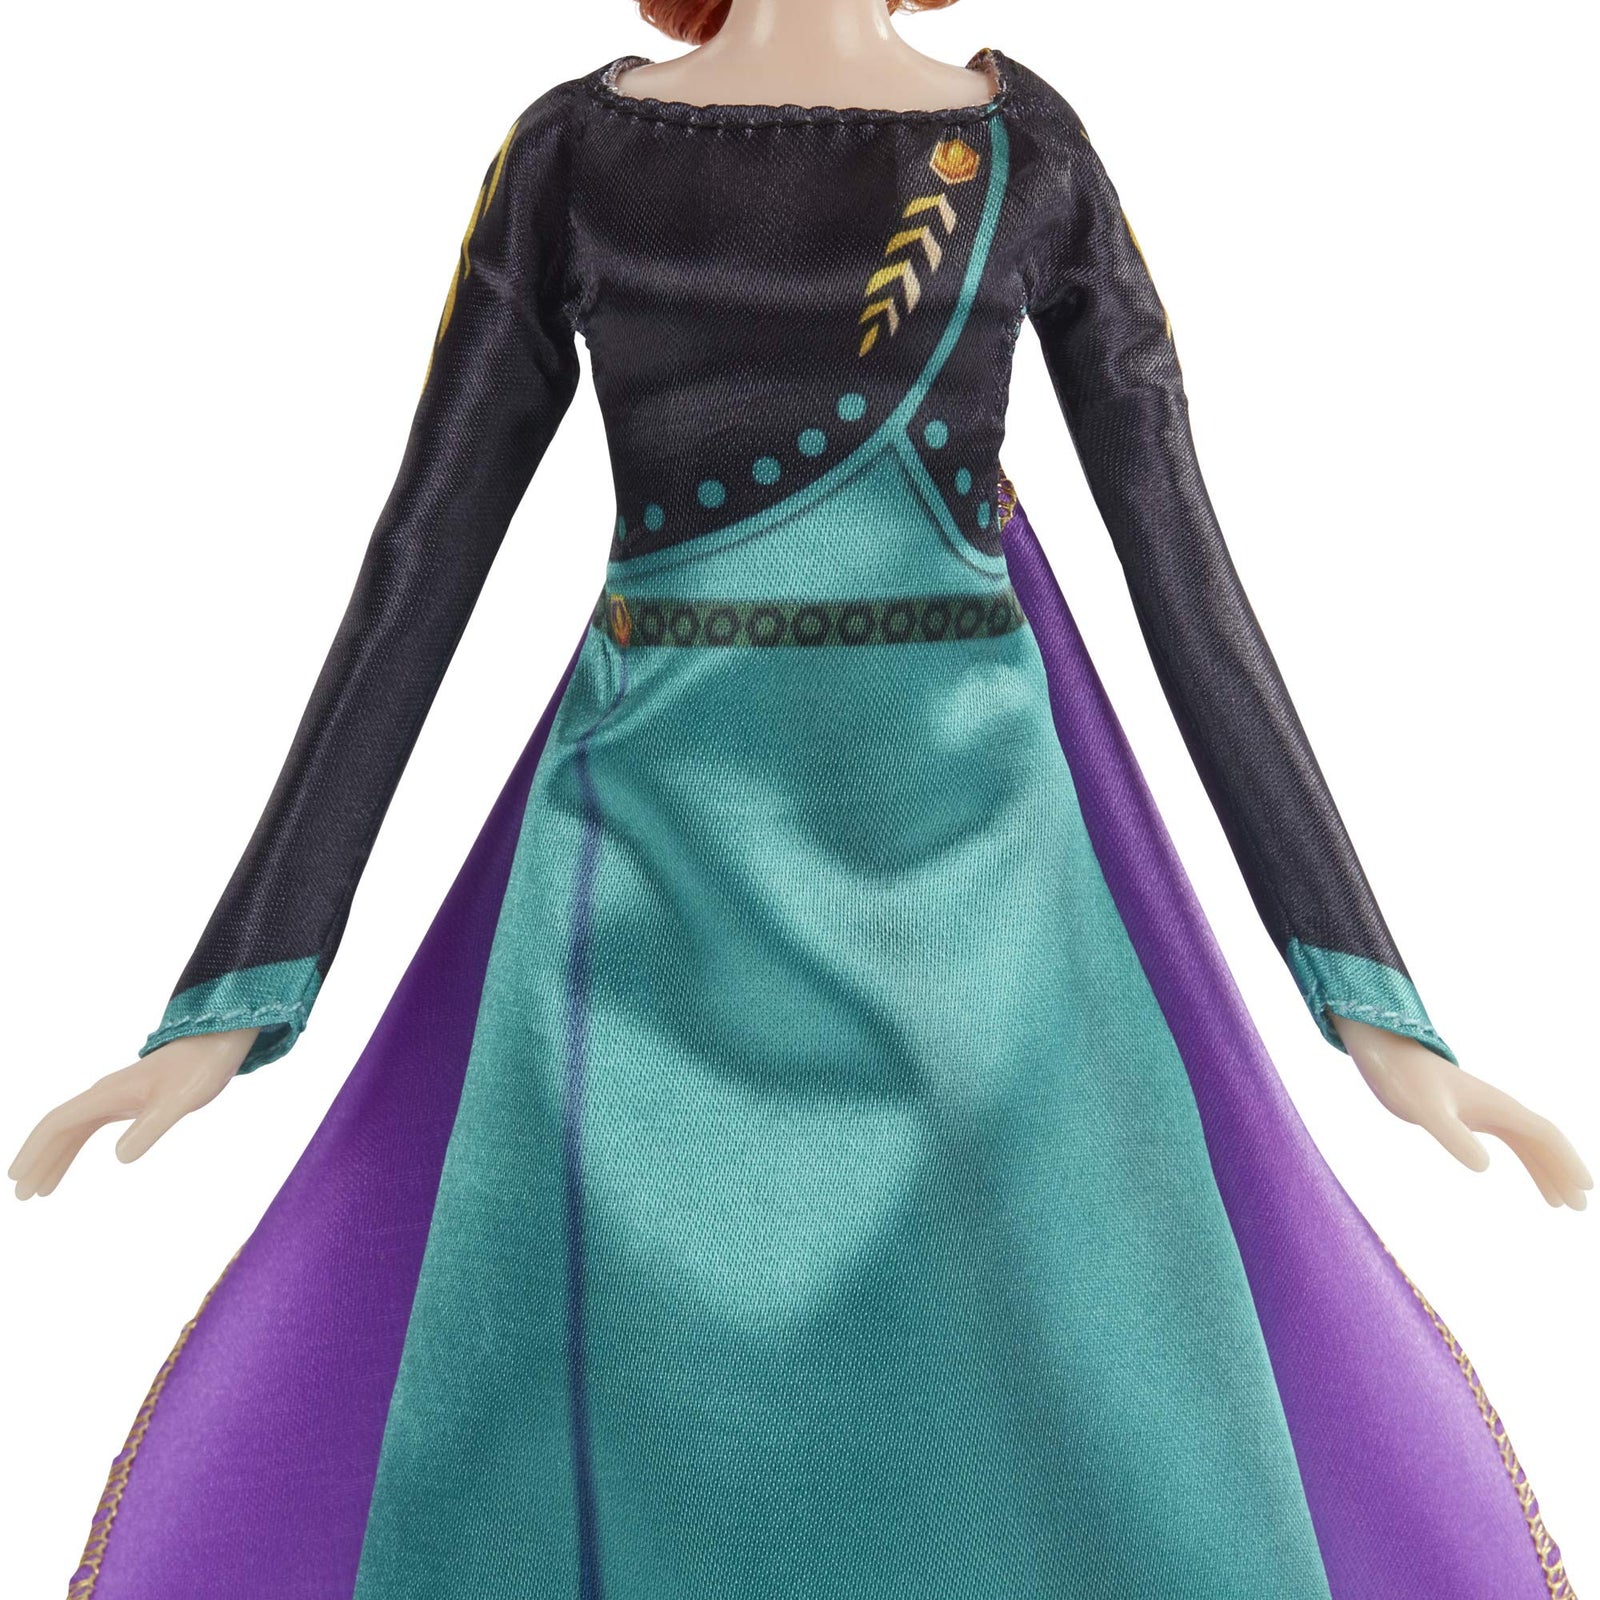 Disney Frozen 2 Queen Anna Fashion Doll, Dress, Shoes, and Long Red Hair, Toy for Kids 3 Years Old and Up